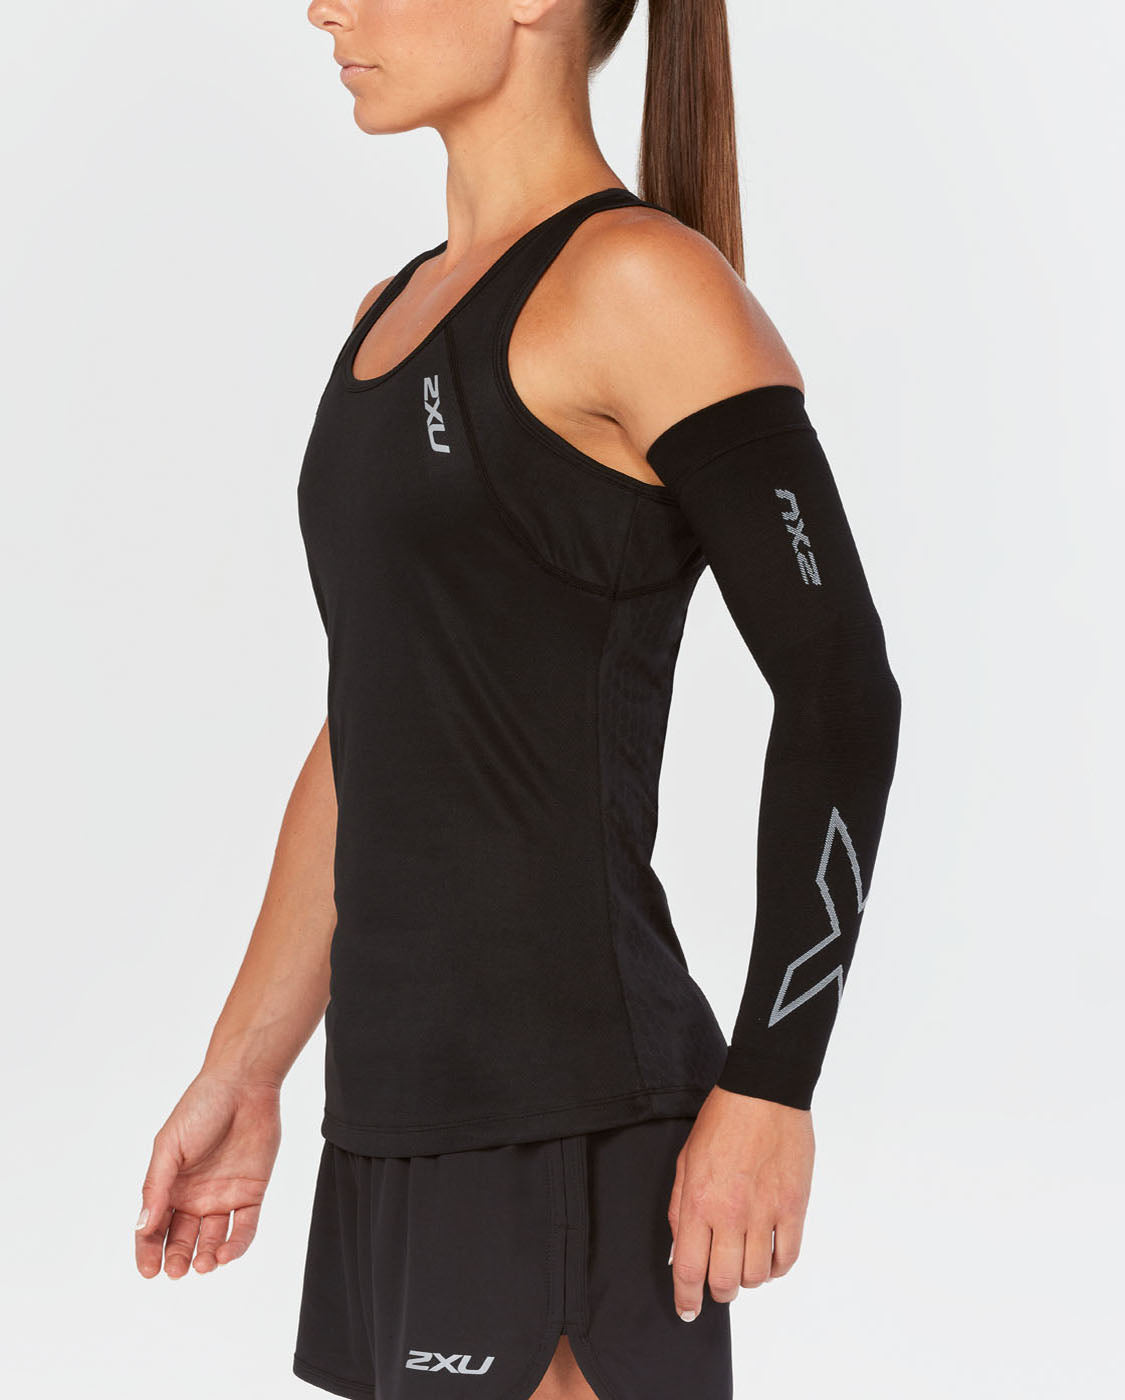 Shapeluxe Arm Compression Sleeve – LURI